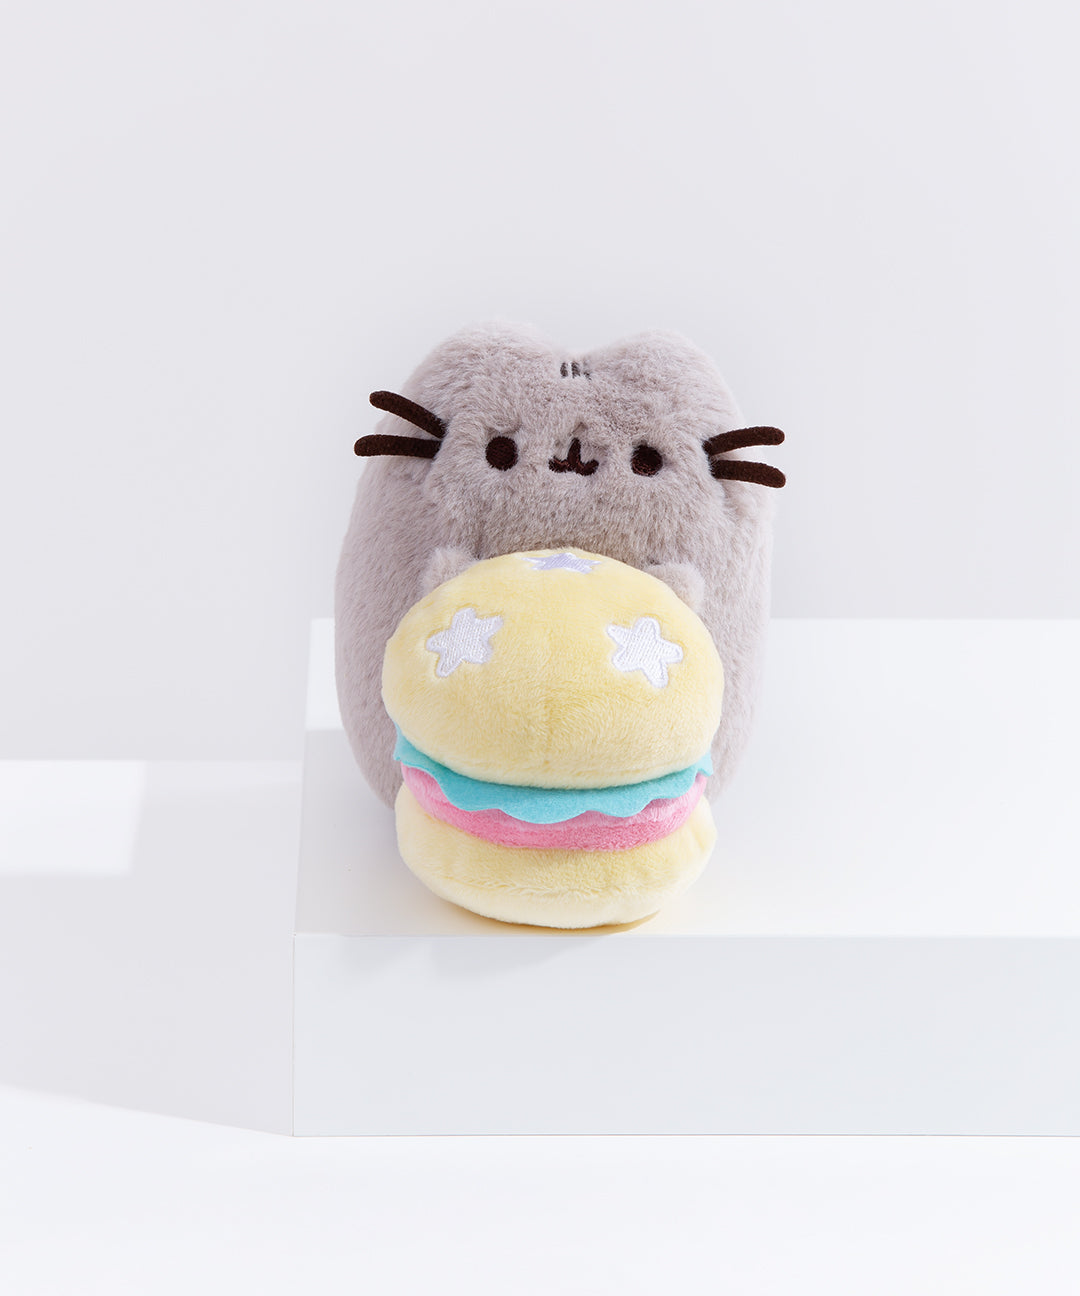 limited edition pusheen